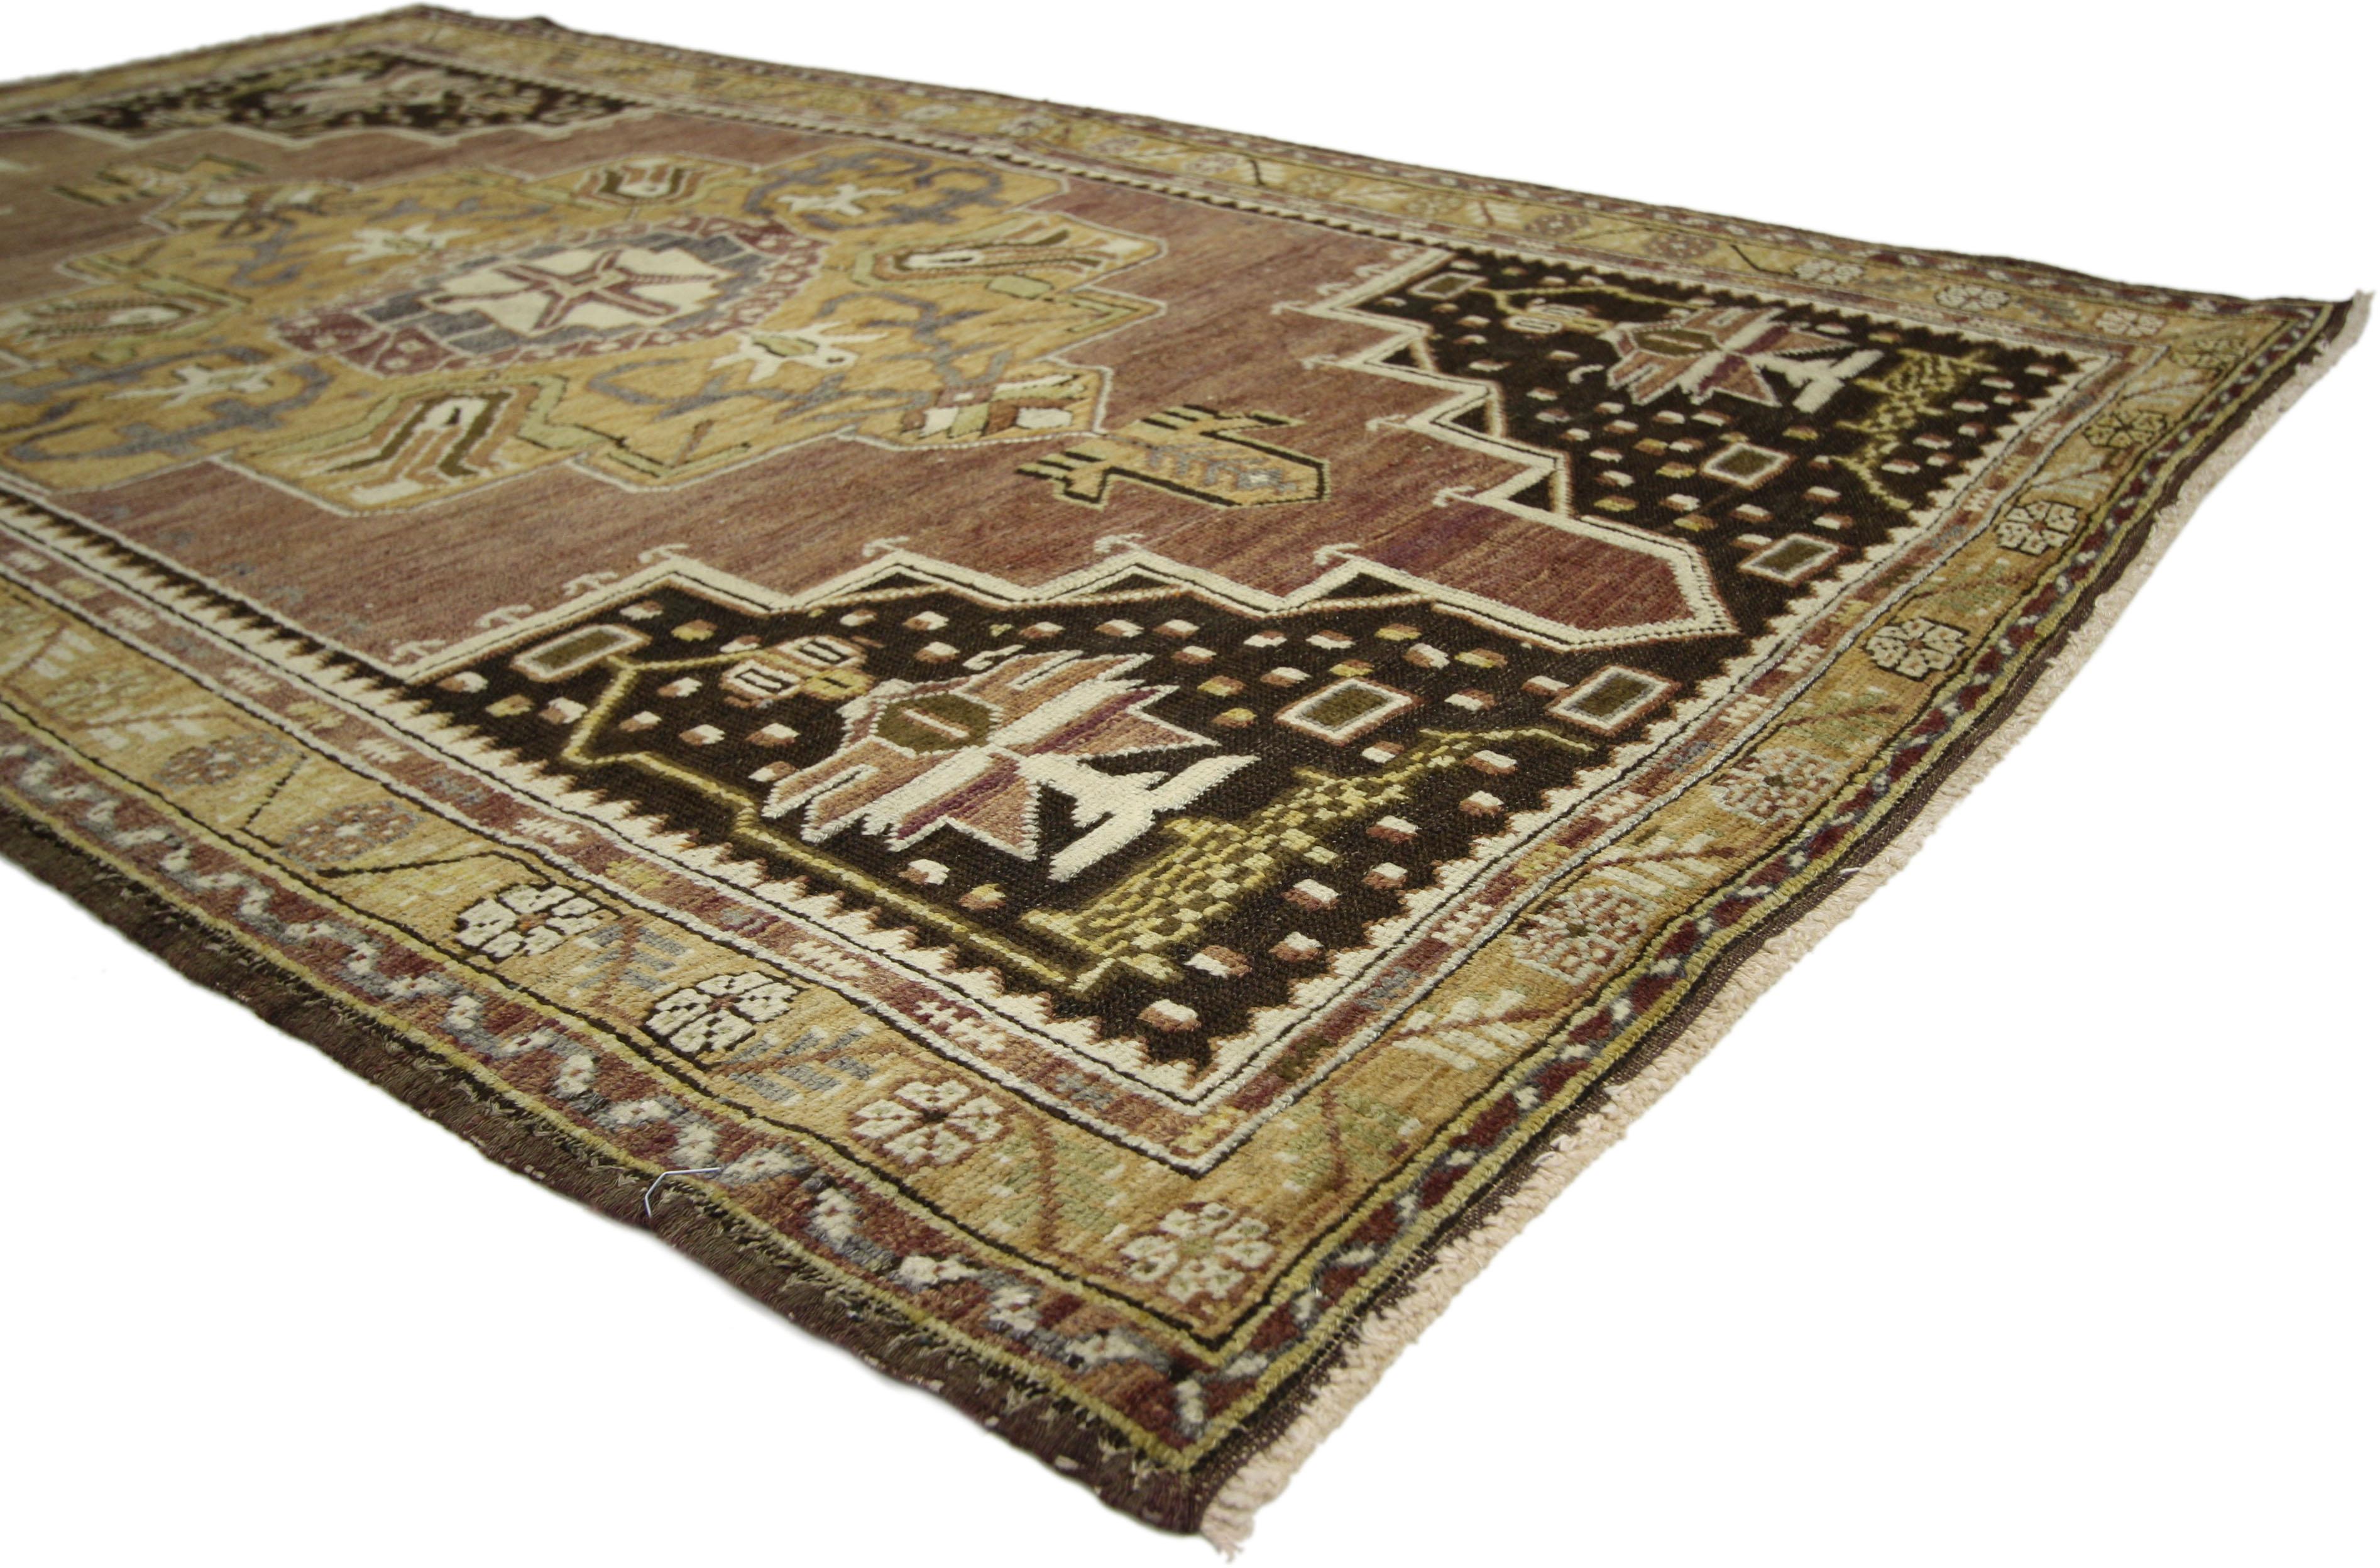 50187 Vintage Turkish Oushak Accent Rug with Mid-Century Modern Style 04'00 x 06'08. Balancing a timeless design with warm, earth-tone colors, this hand-knotted wool vintage Turkish Oushak rug beautifully embodies a Mid-Century Modern style. The